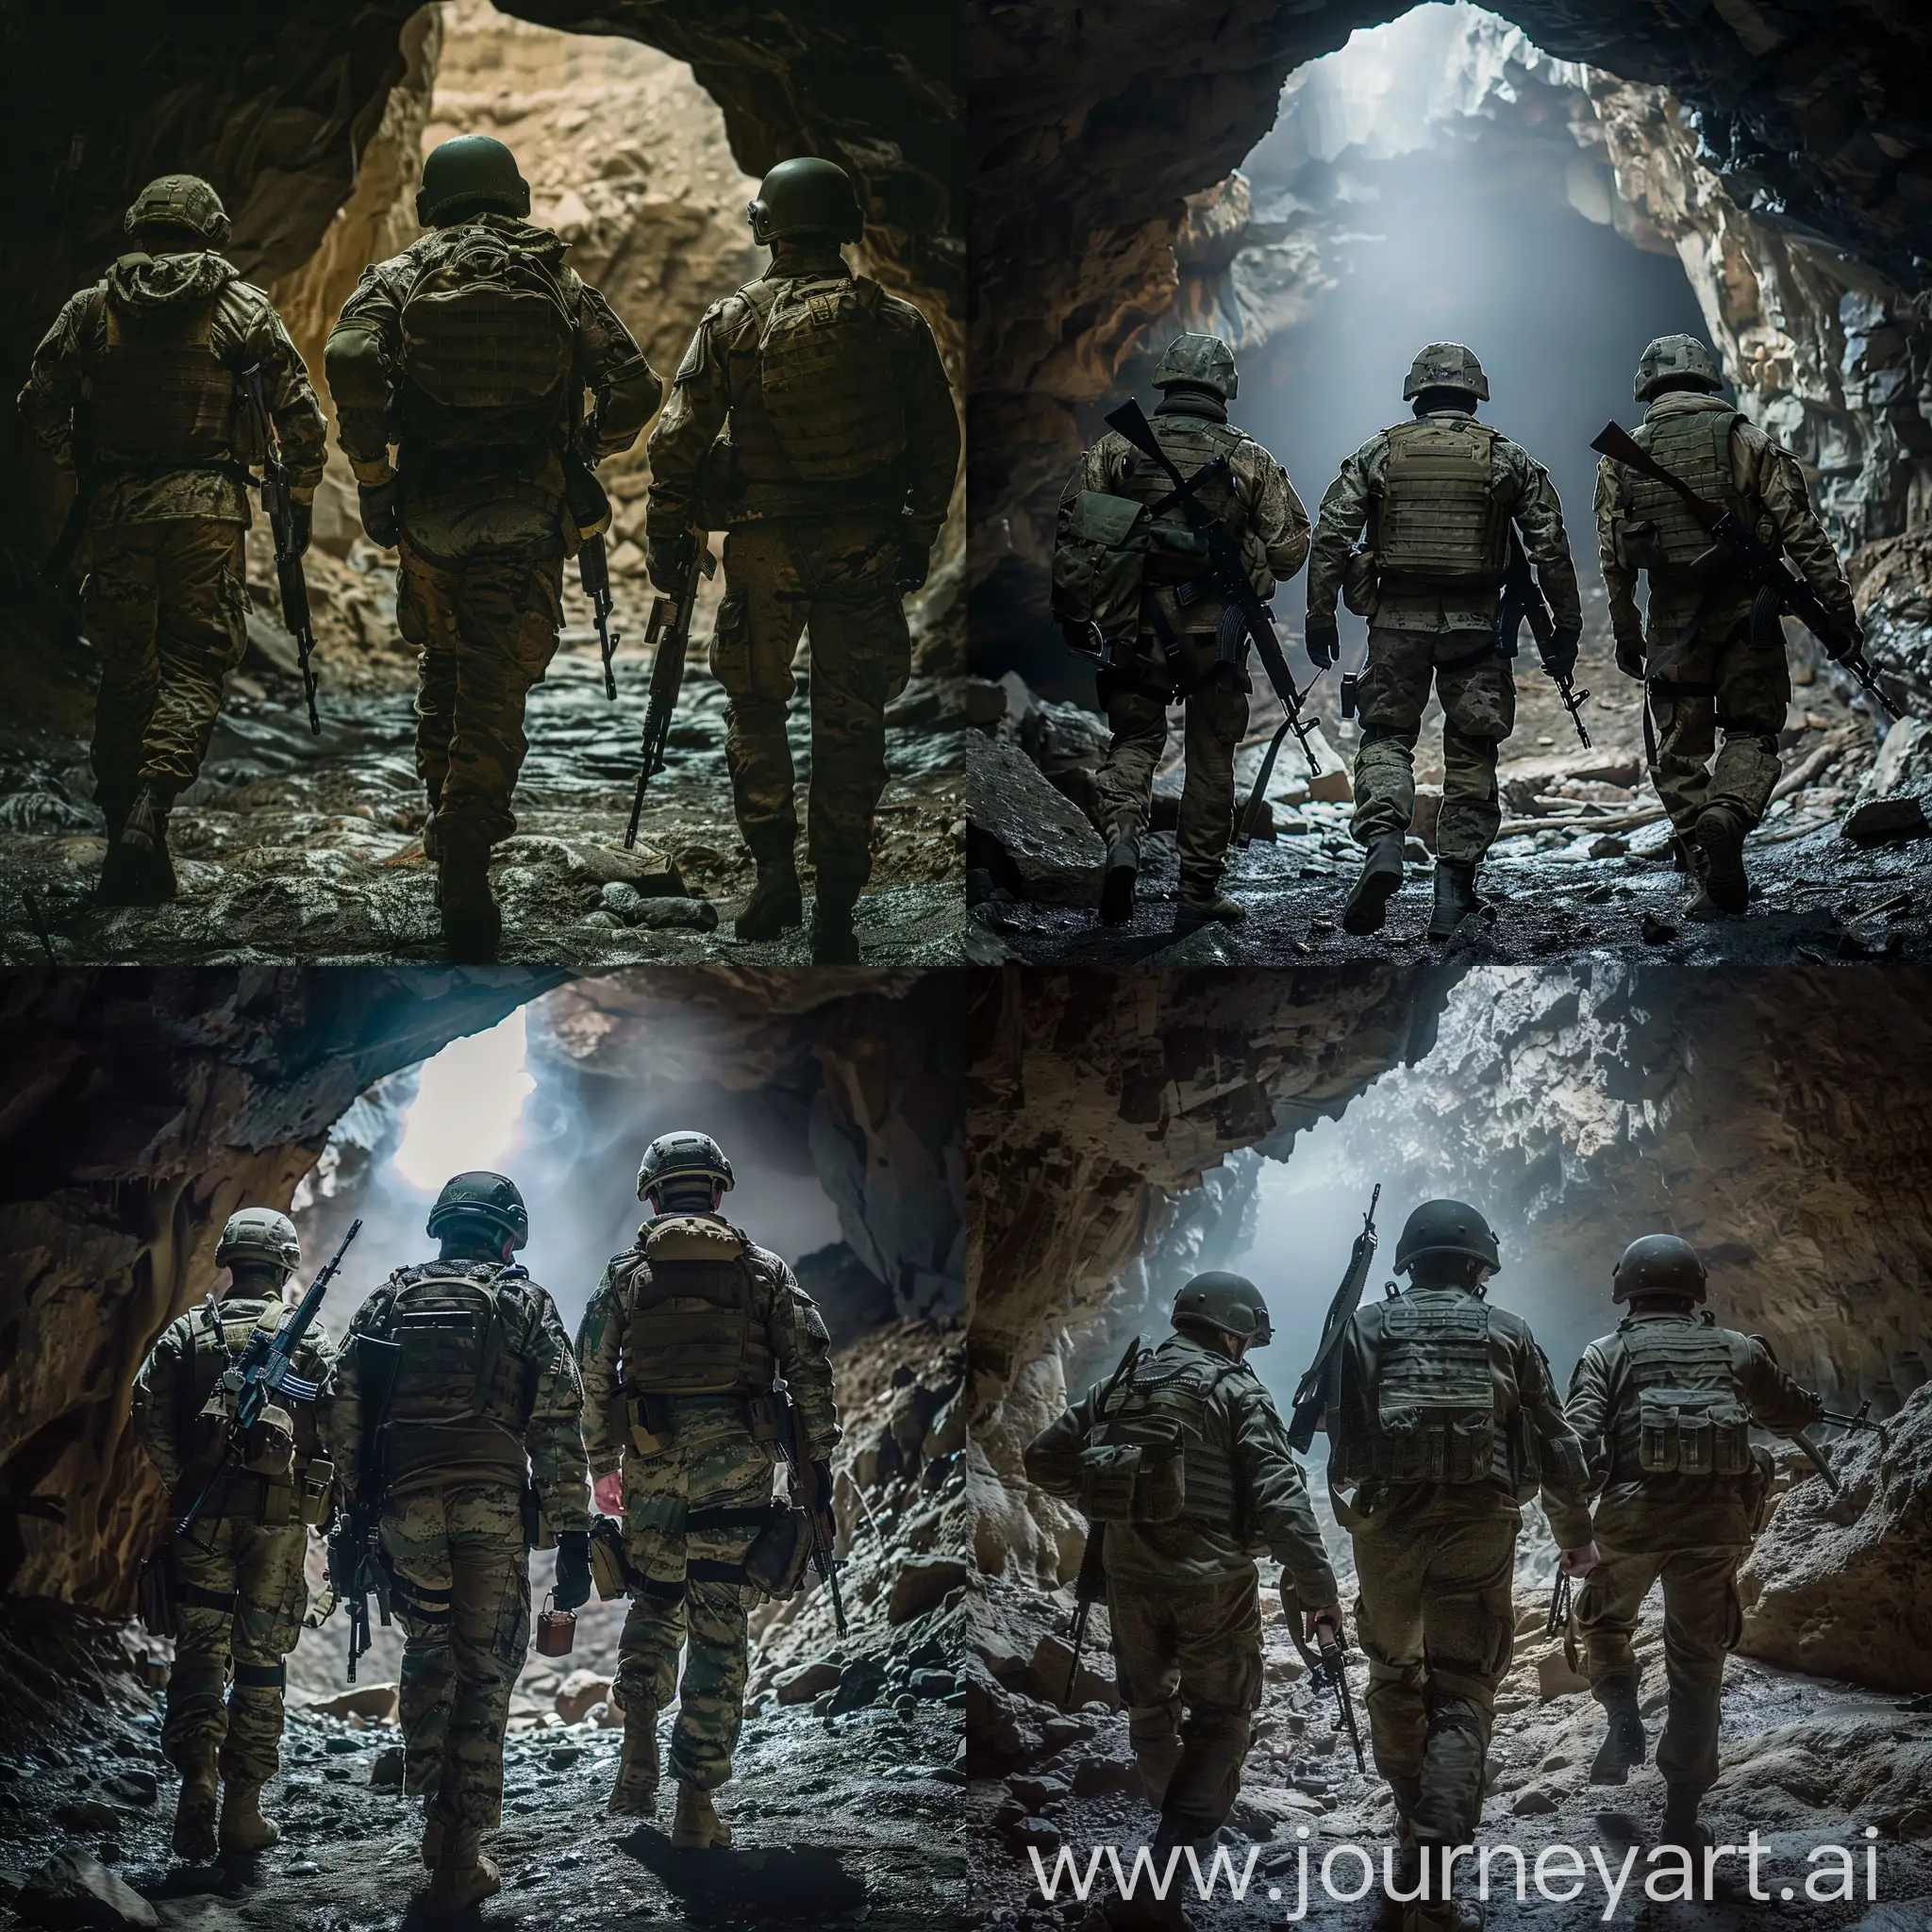 Military-Soldiers-Advancing-Through-Dark-Cave-with-Kalashnikov-Weapons